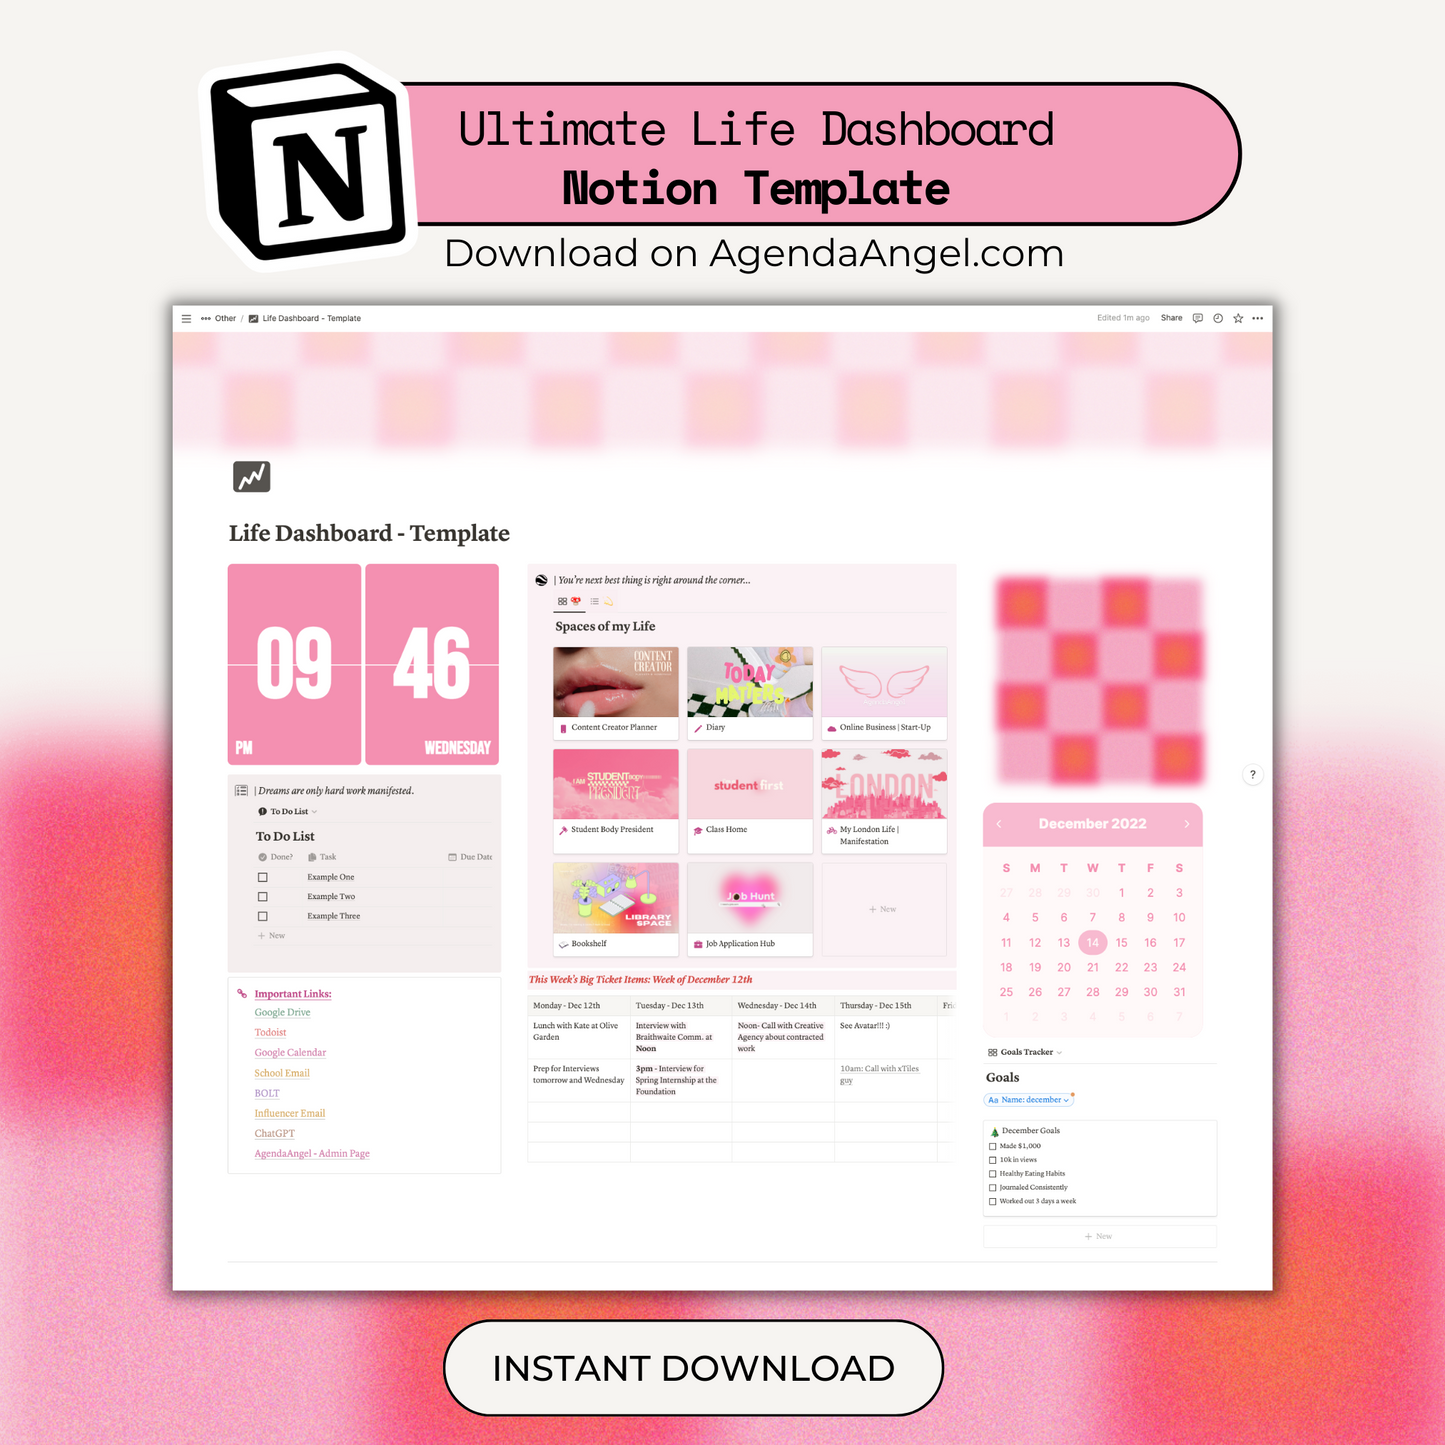 Ultimate Life Dashboard | Notion Template